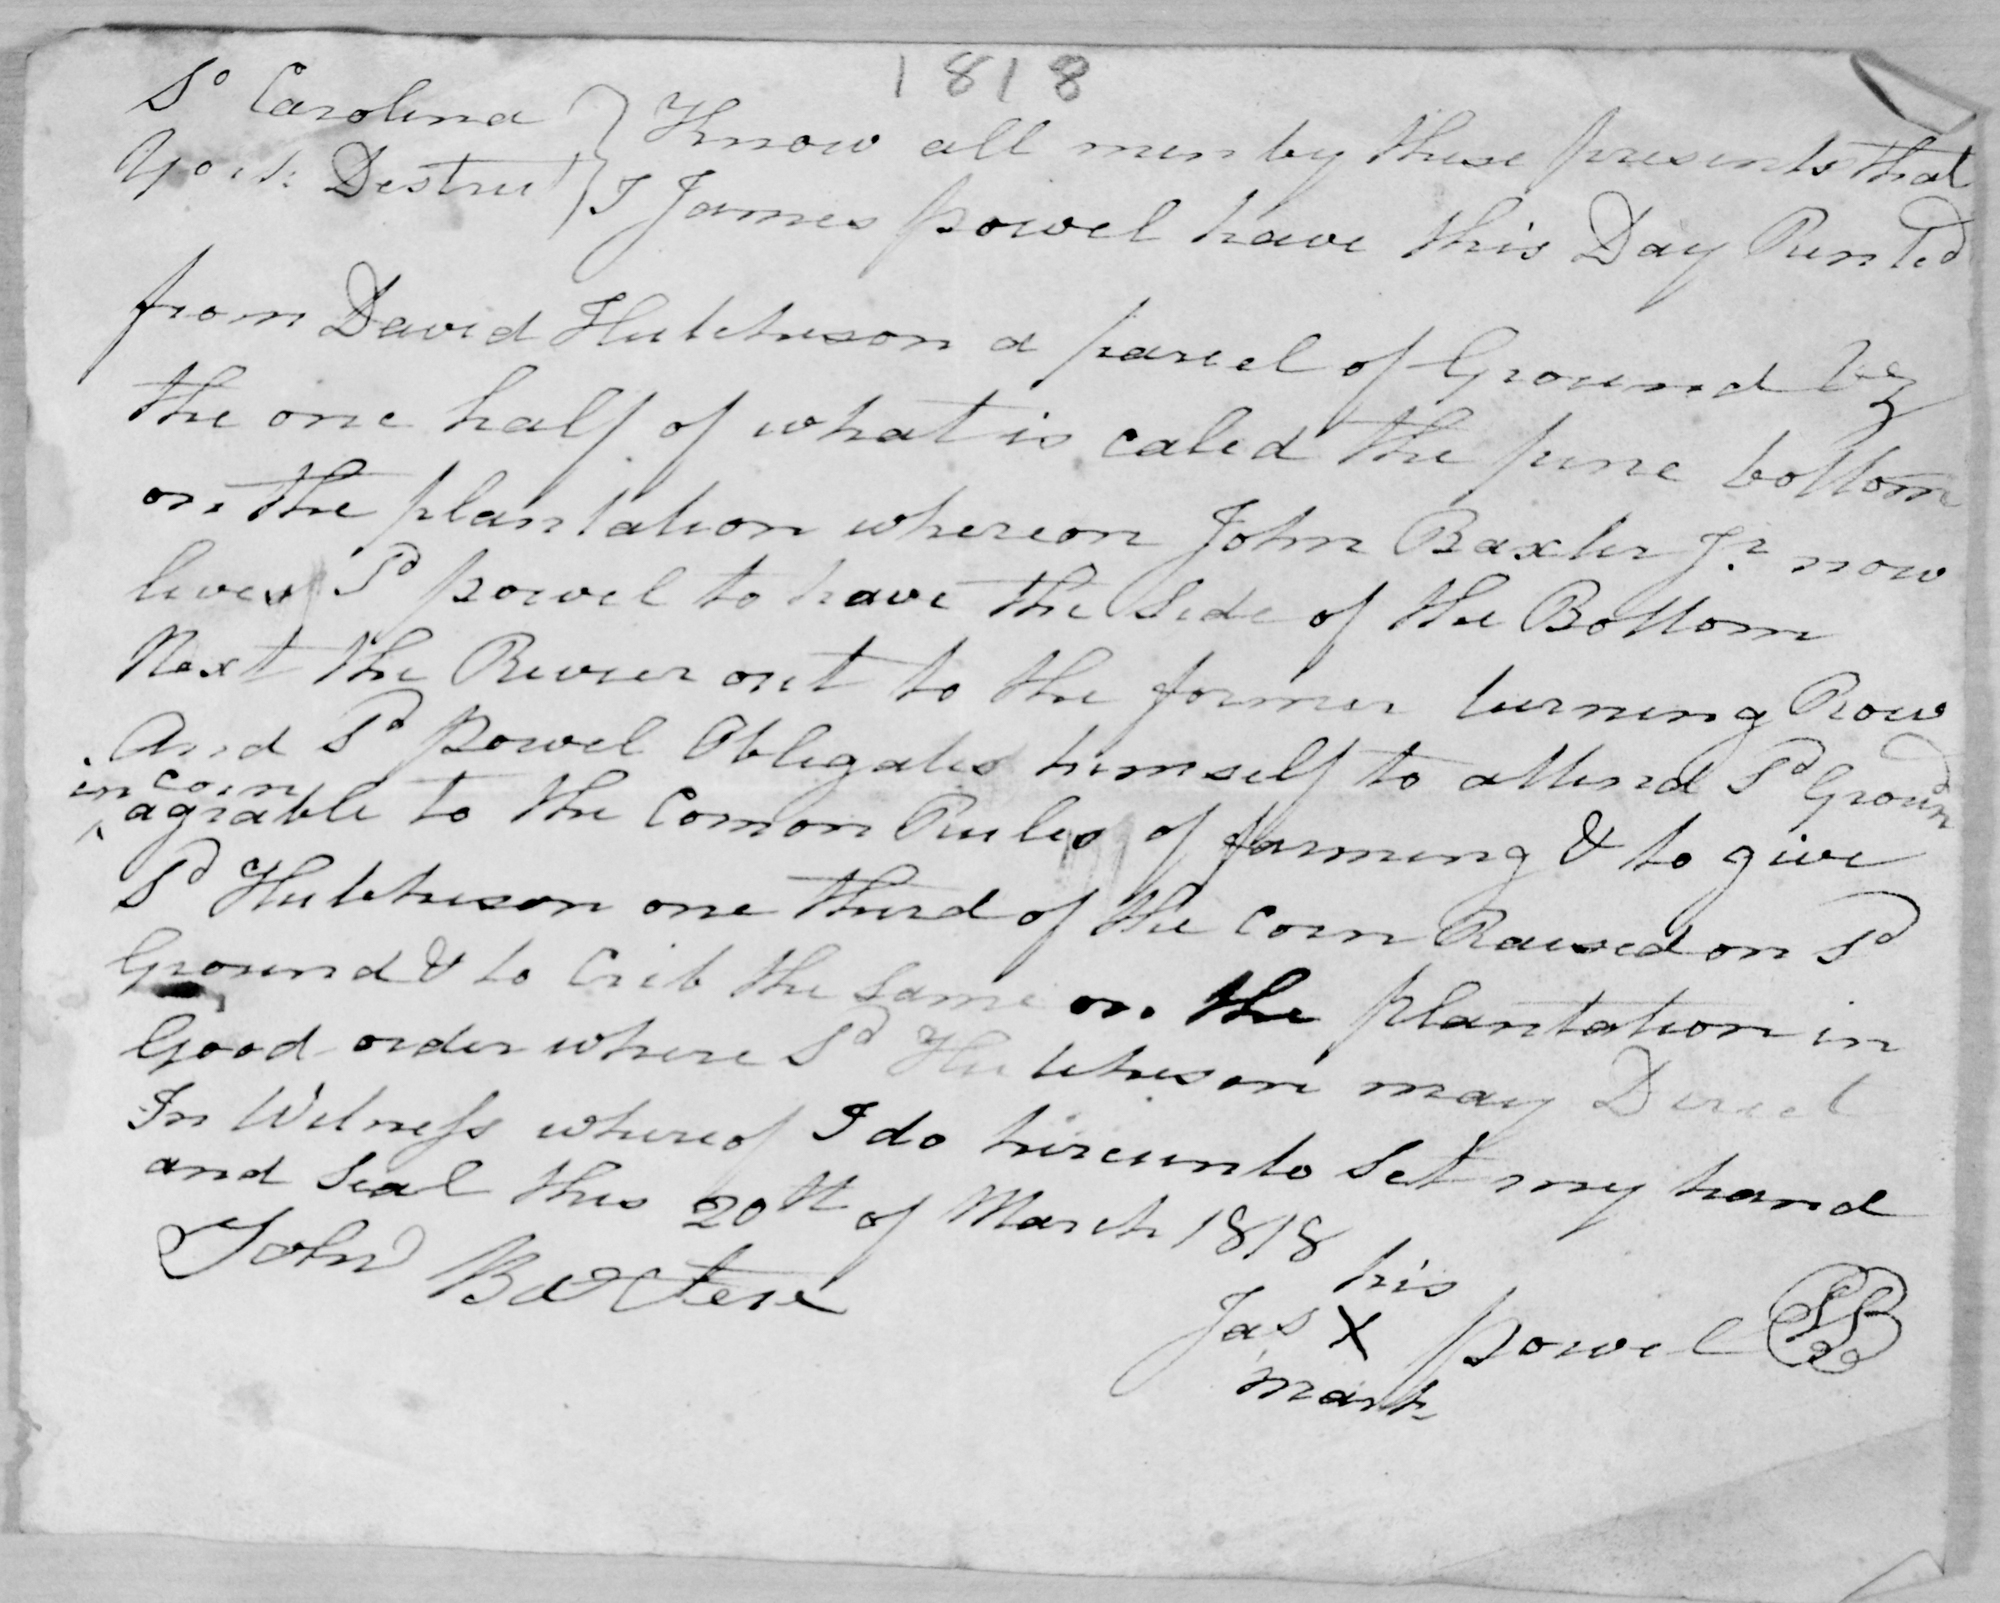 Rental agreement from David Hutchison to James Powel for a parcel known as the Pine Bottom on the River where John Baxter currently lives.  Powel is to provide 1/3 of the corn crop to David Hutchison.  Dated March 20, 1818 and witnessed by John Baxter.